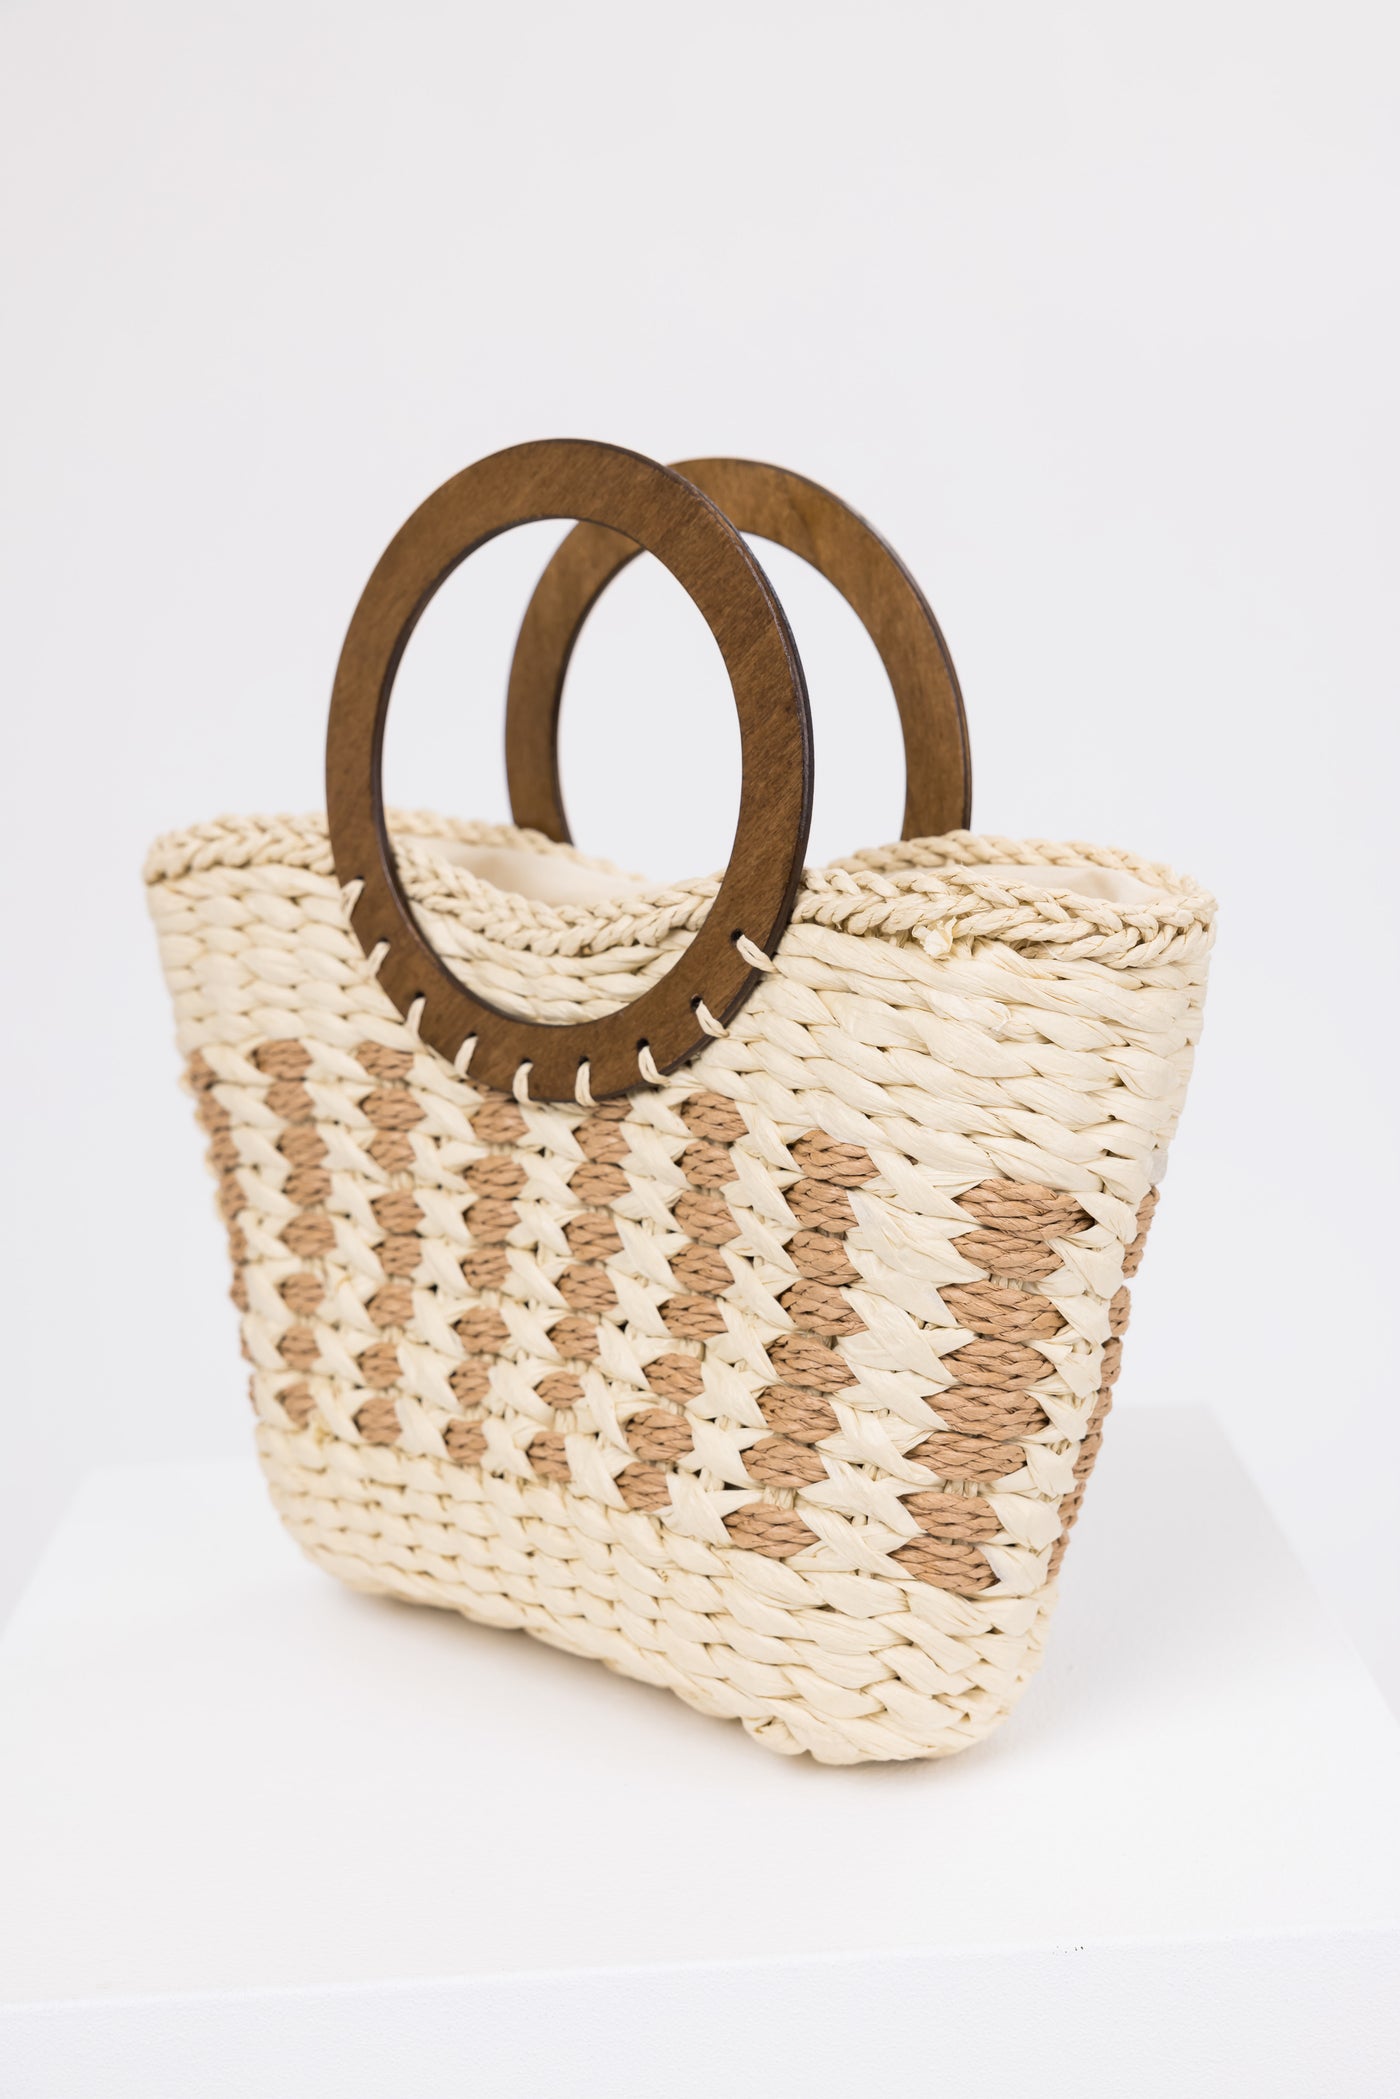 Ivory Braided Tote Bag with Wood Handles